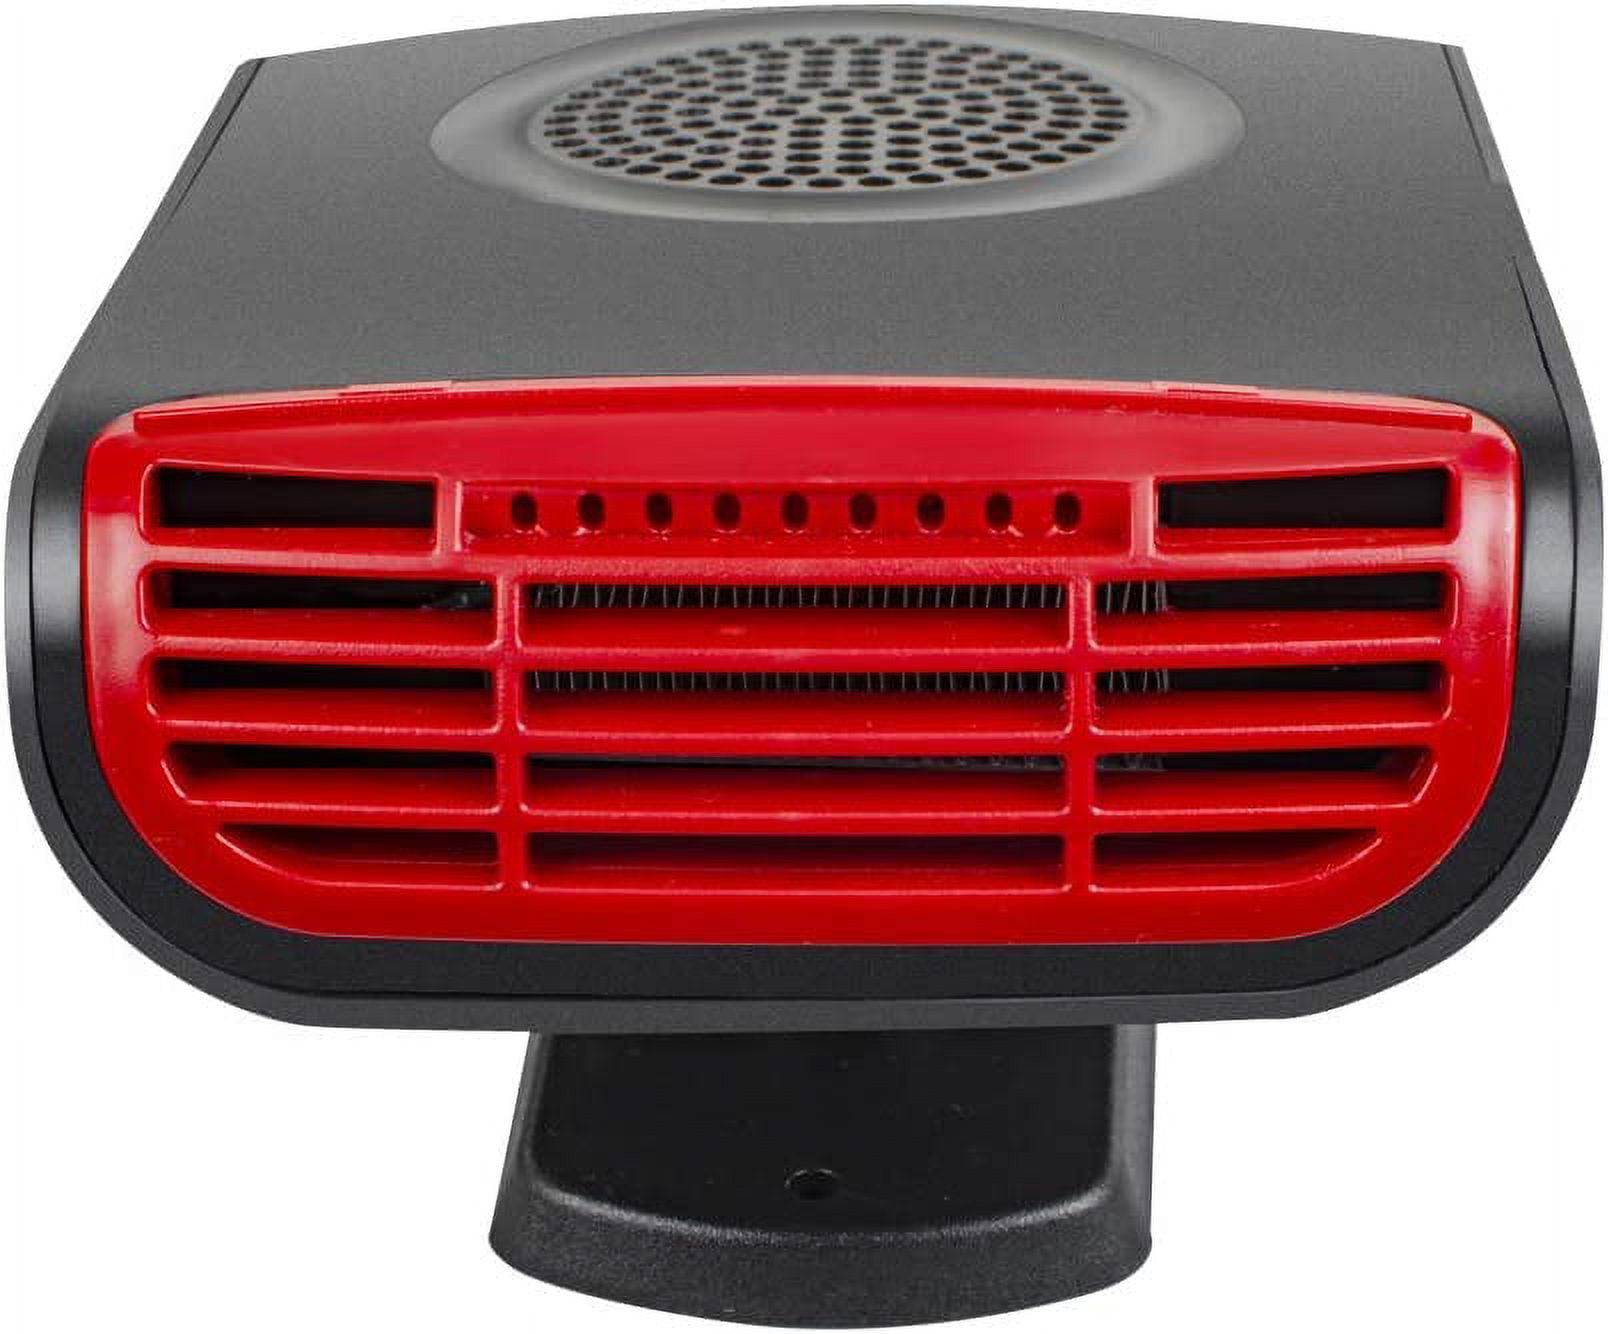 Car Heater,12v Auto Heater Fan,Fast Heating Car Windshield Defrost De –  icarscars - Your Preferred Auto Parts